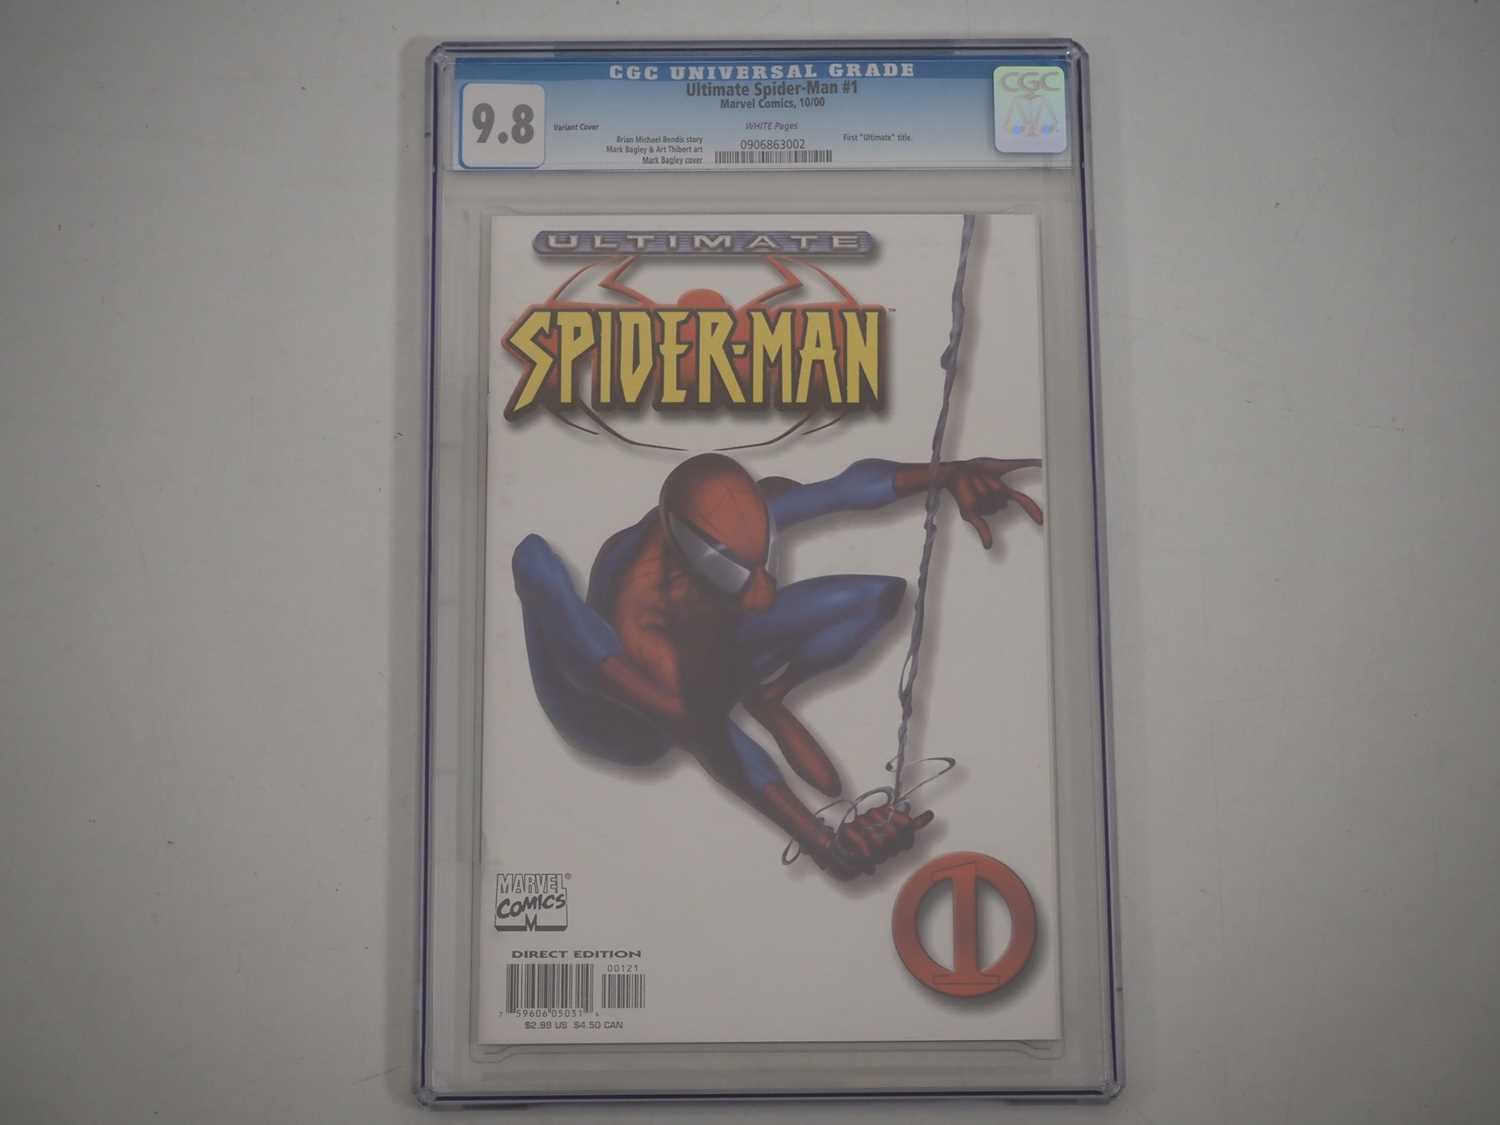 ULTIMATE SPIDER-MAN #1 VARIANT COVER (2000 - MARVEL) - GRADED 9.8(NM/MINT) by CGC - Includes the